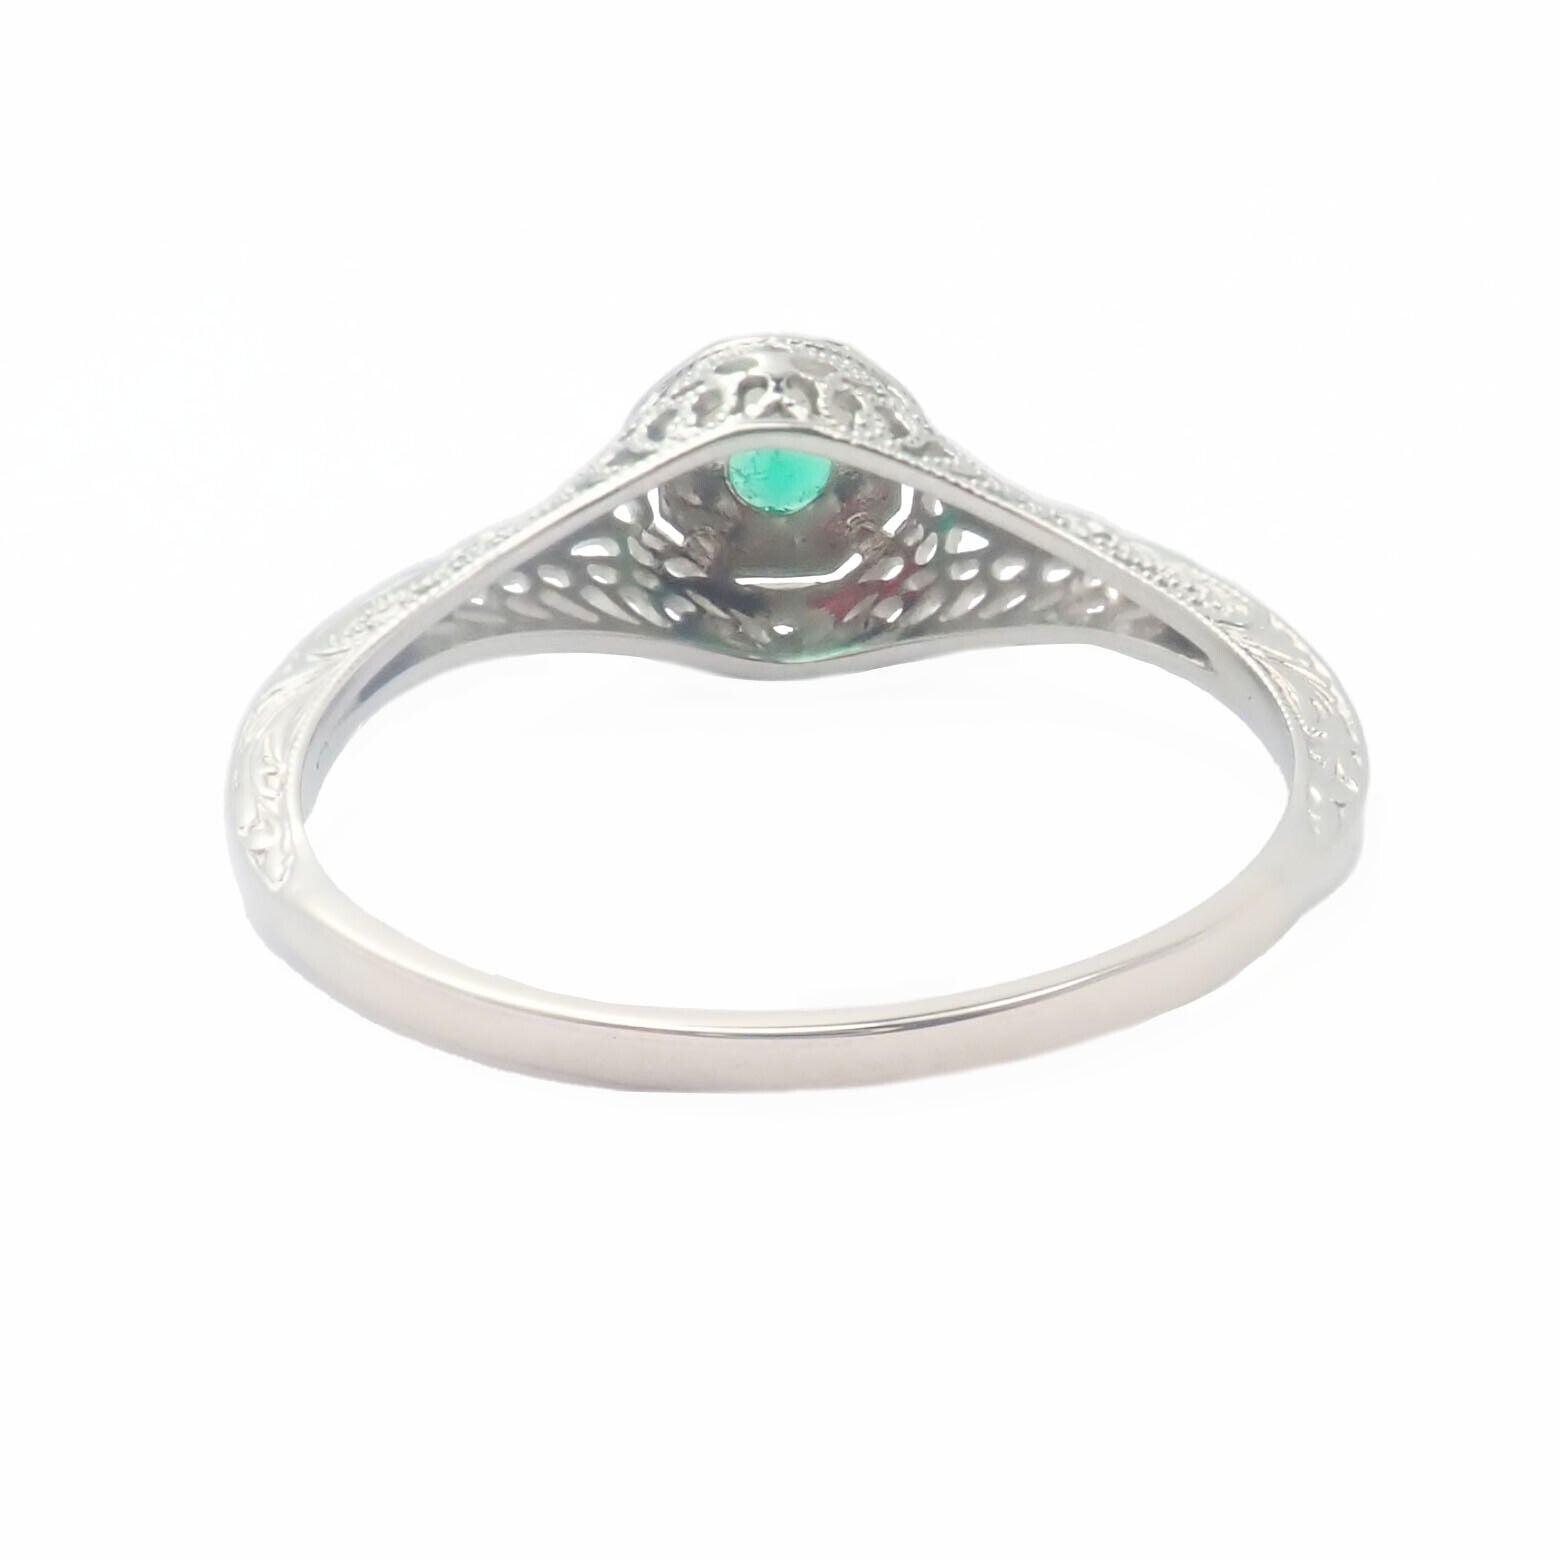 Estate Jewelry & Watches:Vintage & Antique Jewelry:Rings Vintage Estate 18k White Gold Emerald Art Deco Filigree Ring